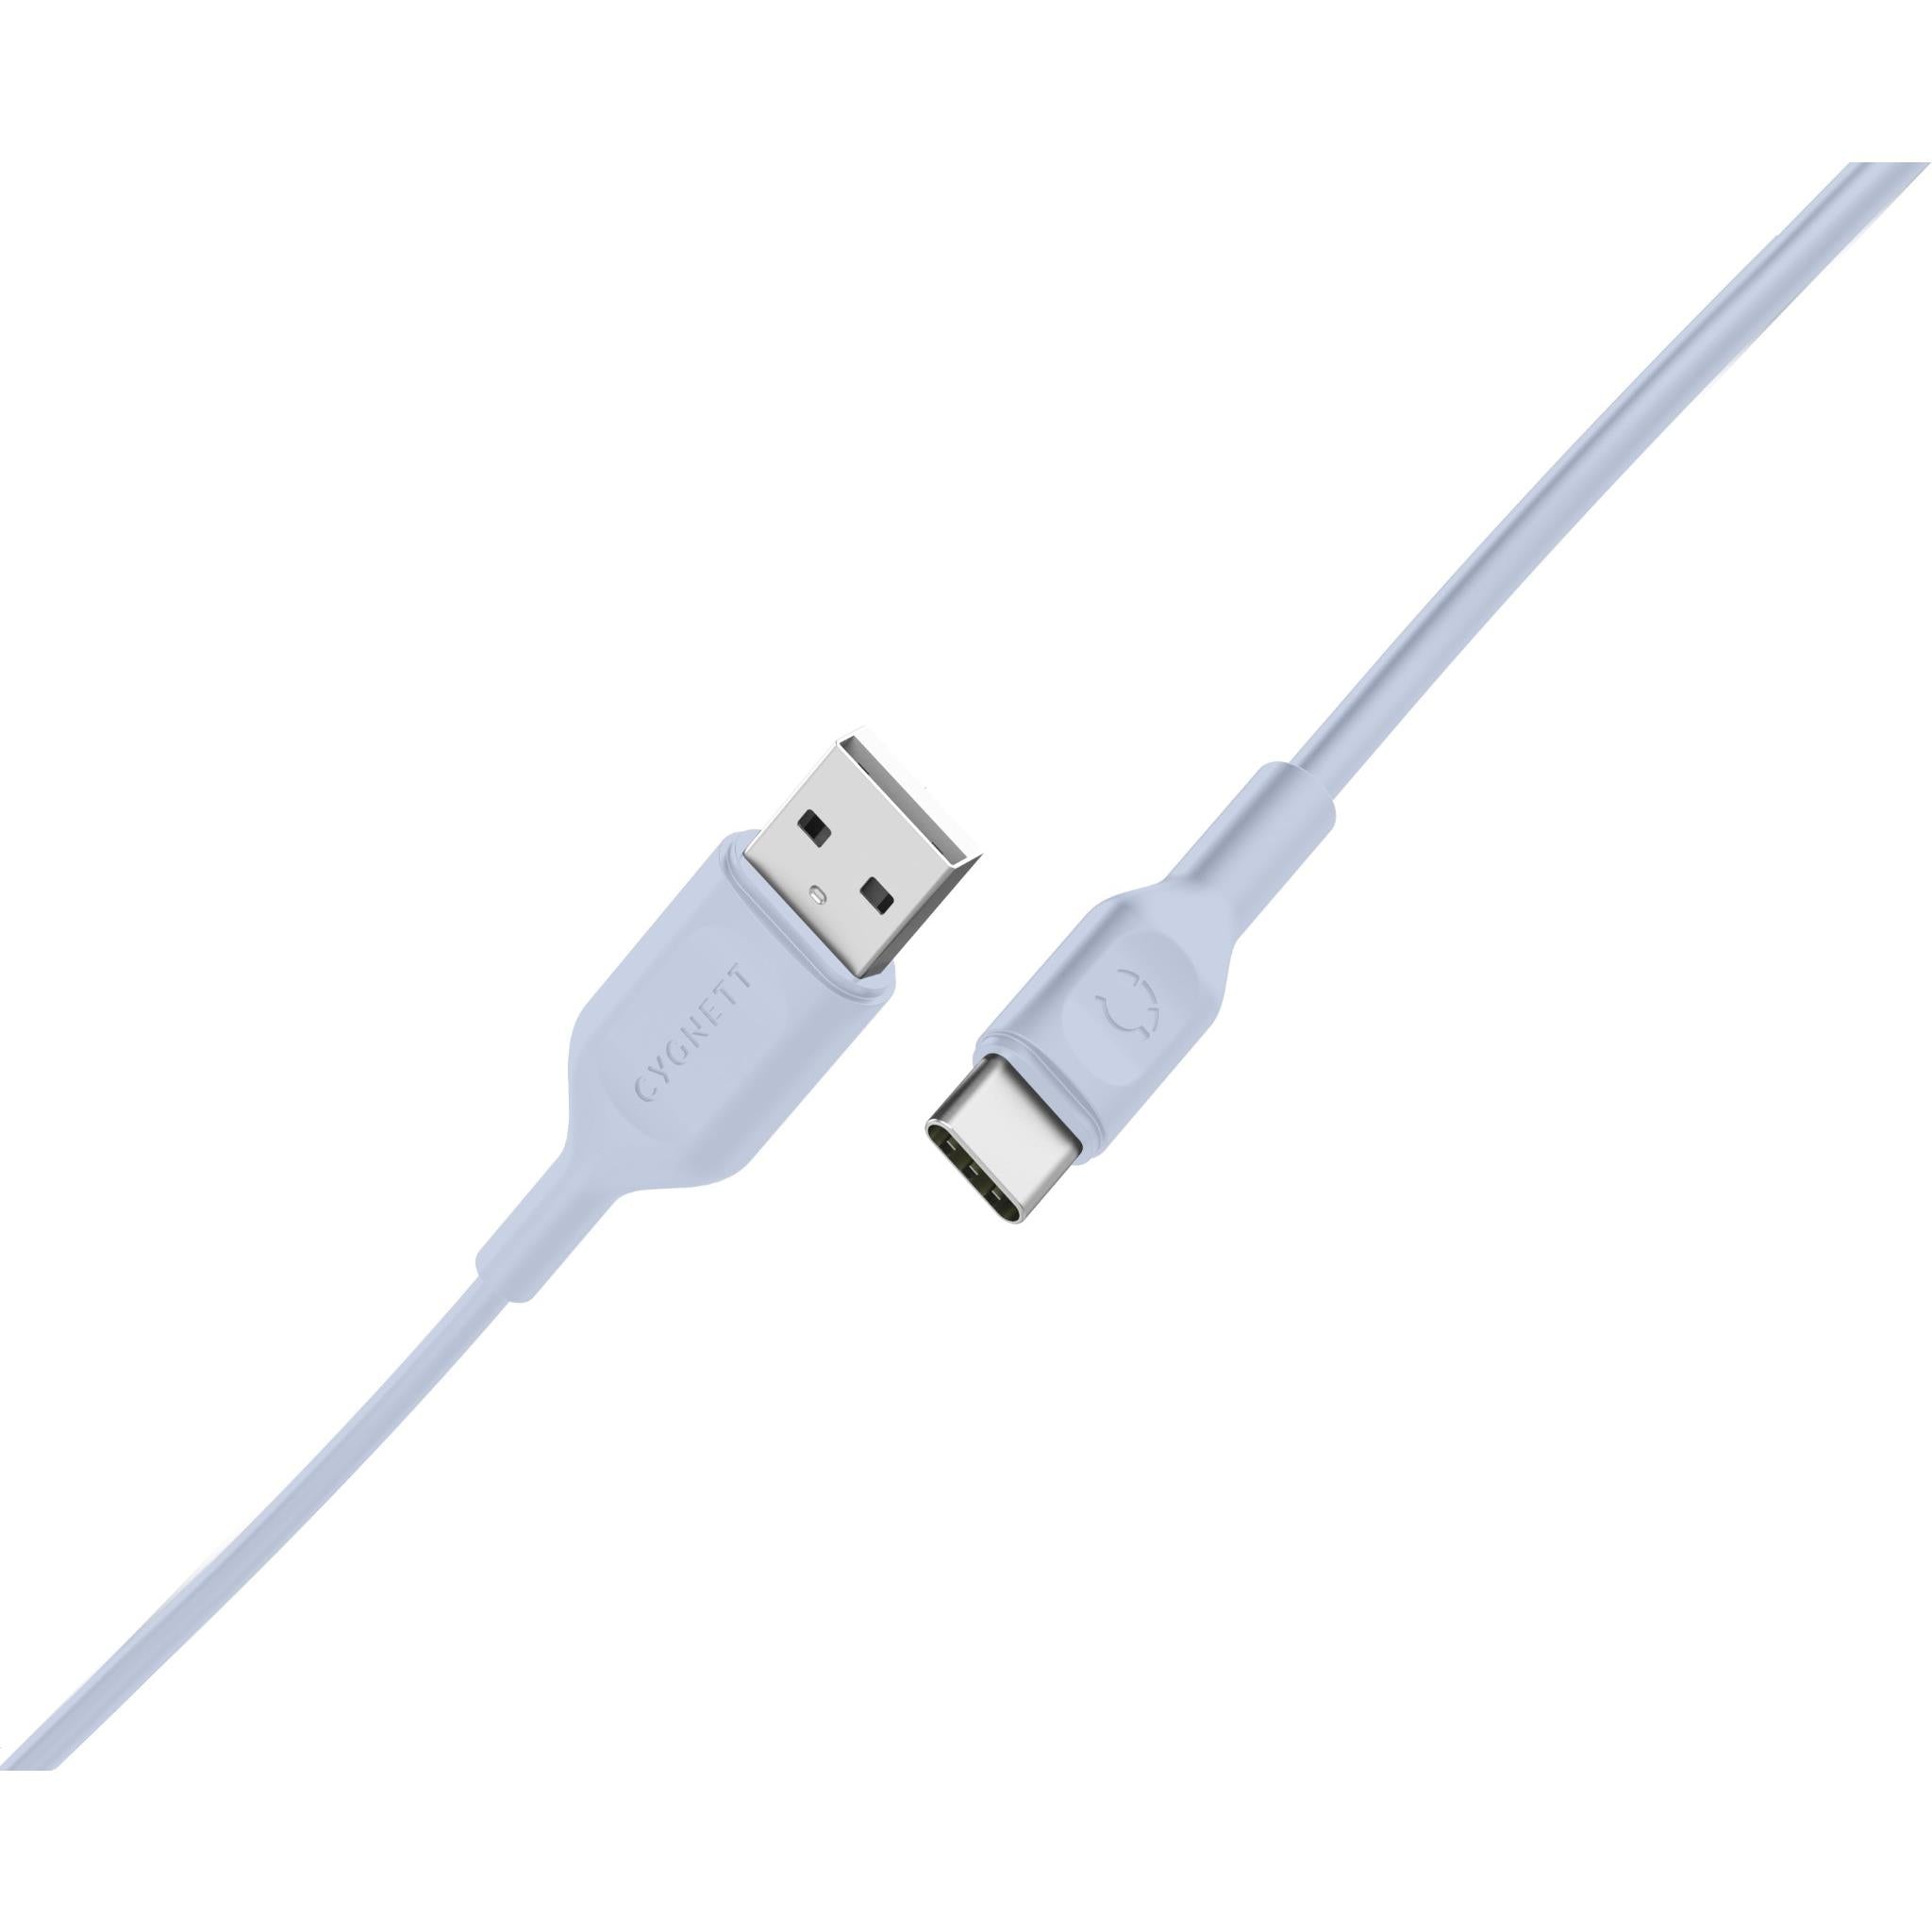 cygnett charge and connect usb-c to usb-a cable 1.2m (light blue)